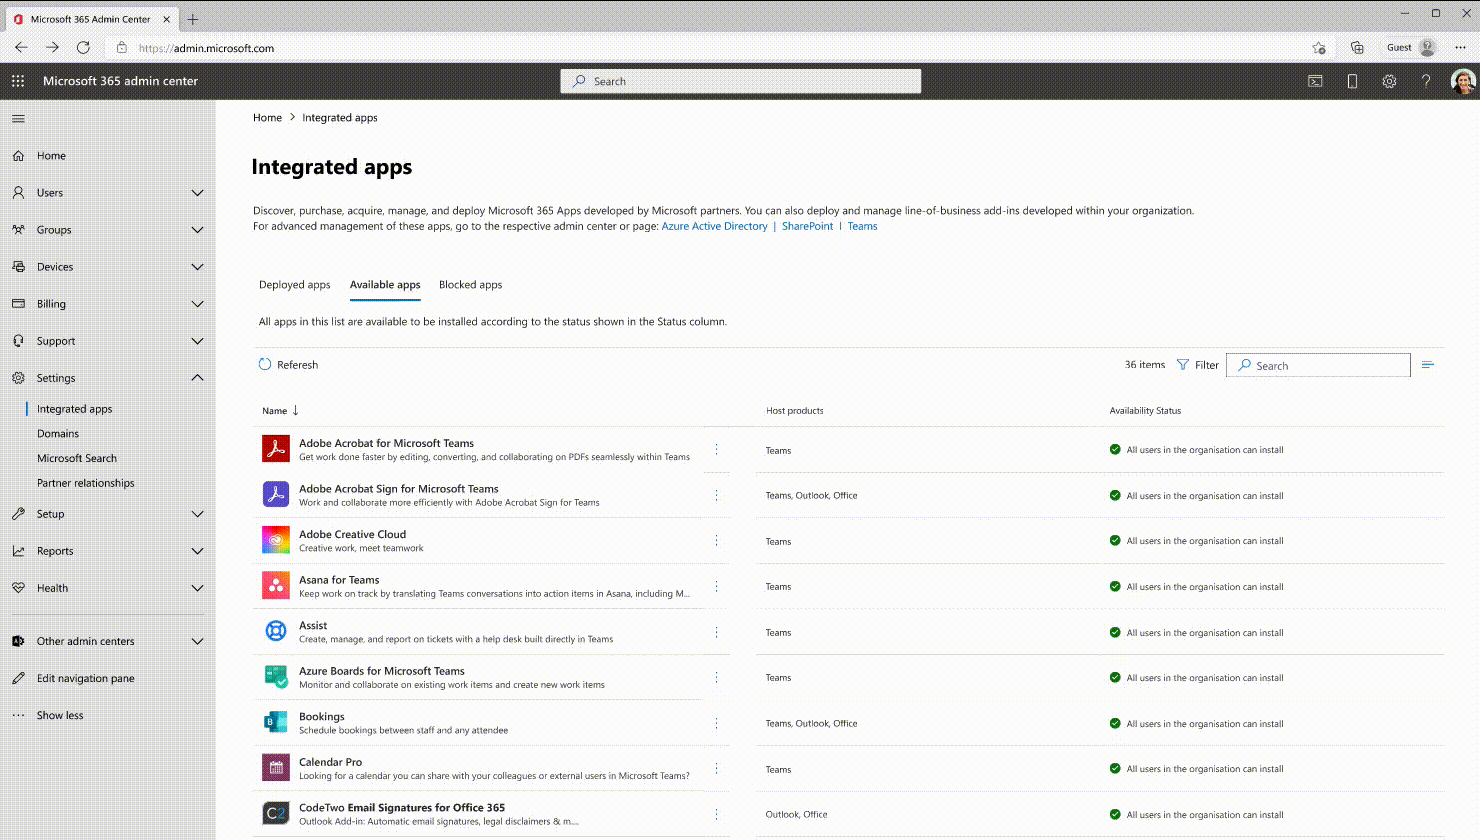 Easy to use applications for individuals, teams and organizations